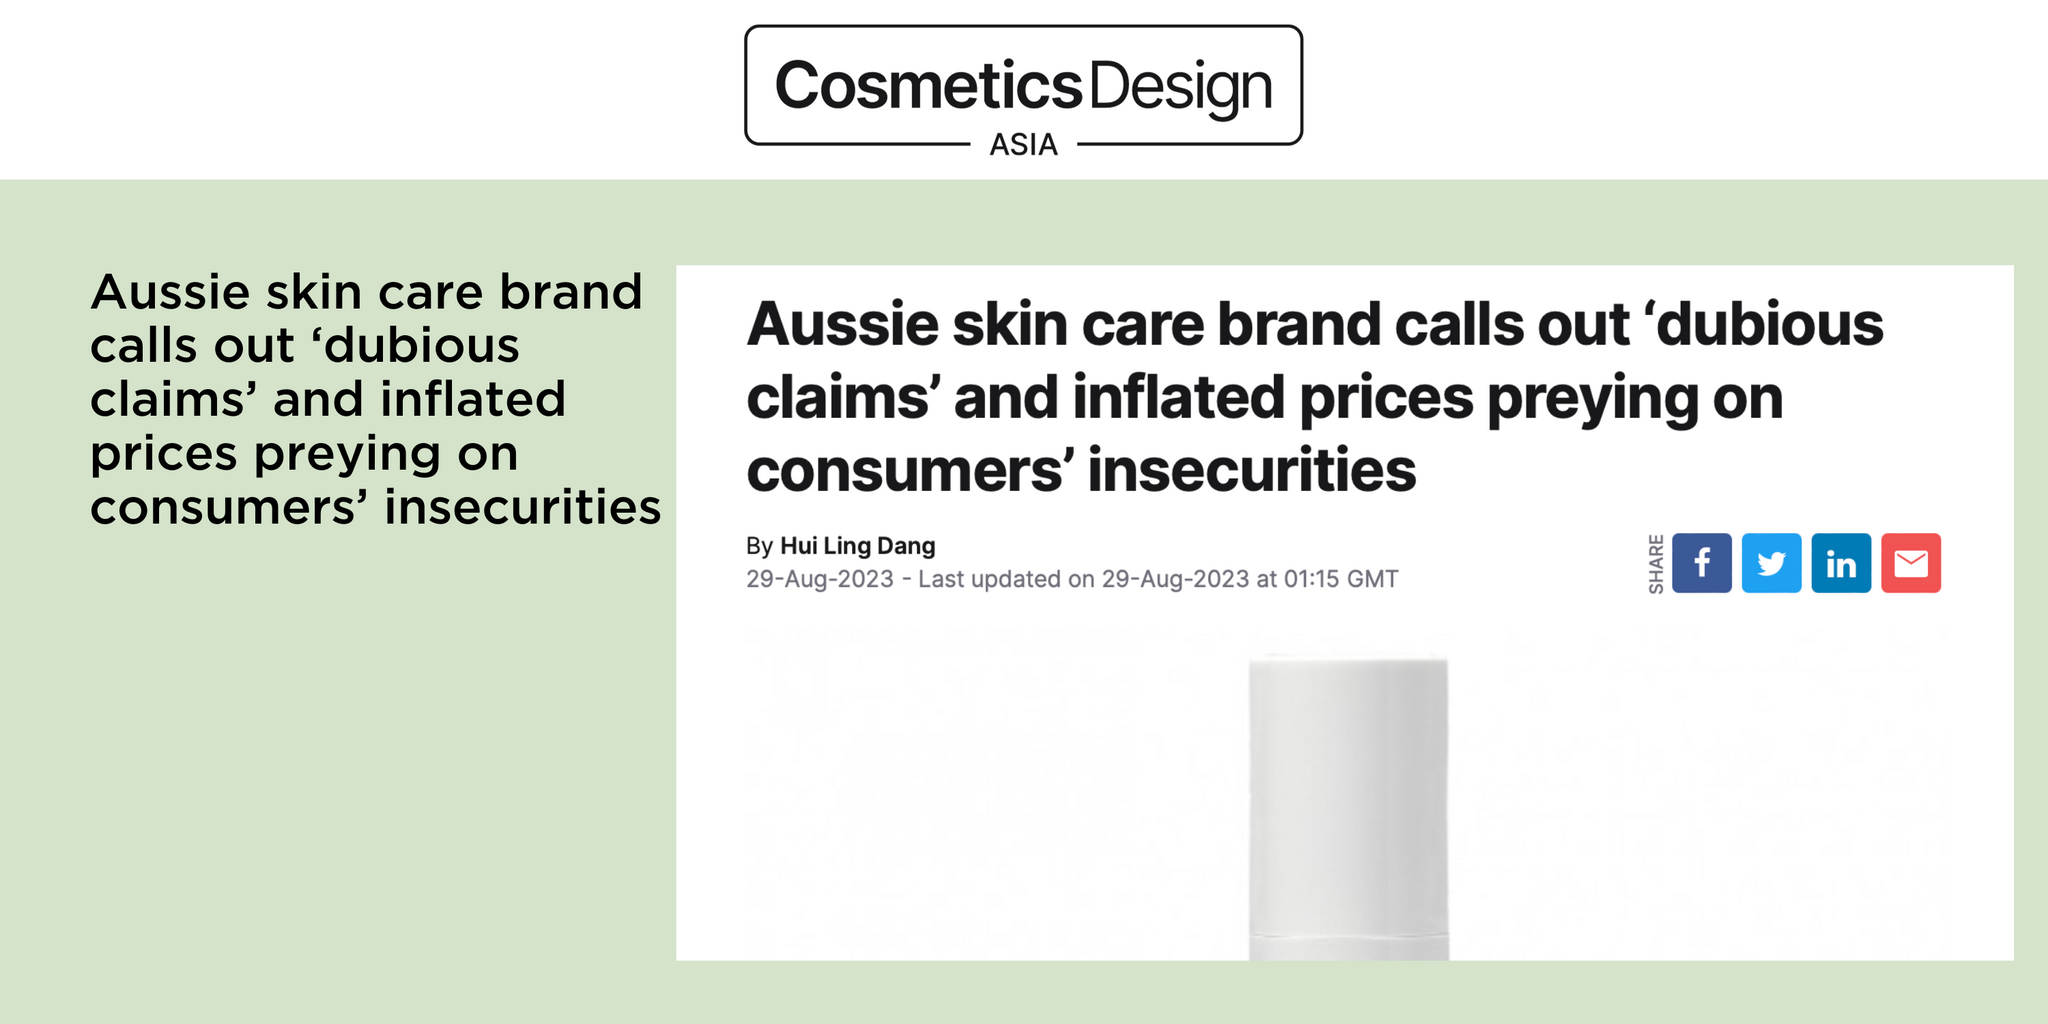 Aussie skin care brand calls out ‘dubious claims’ and inflated prices preying on consumers’ insecurities